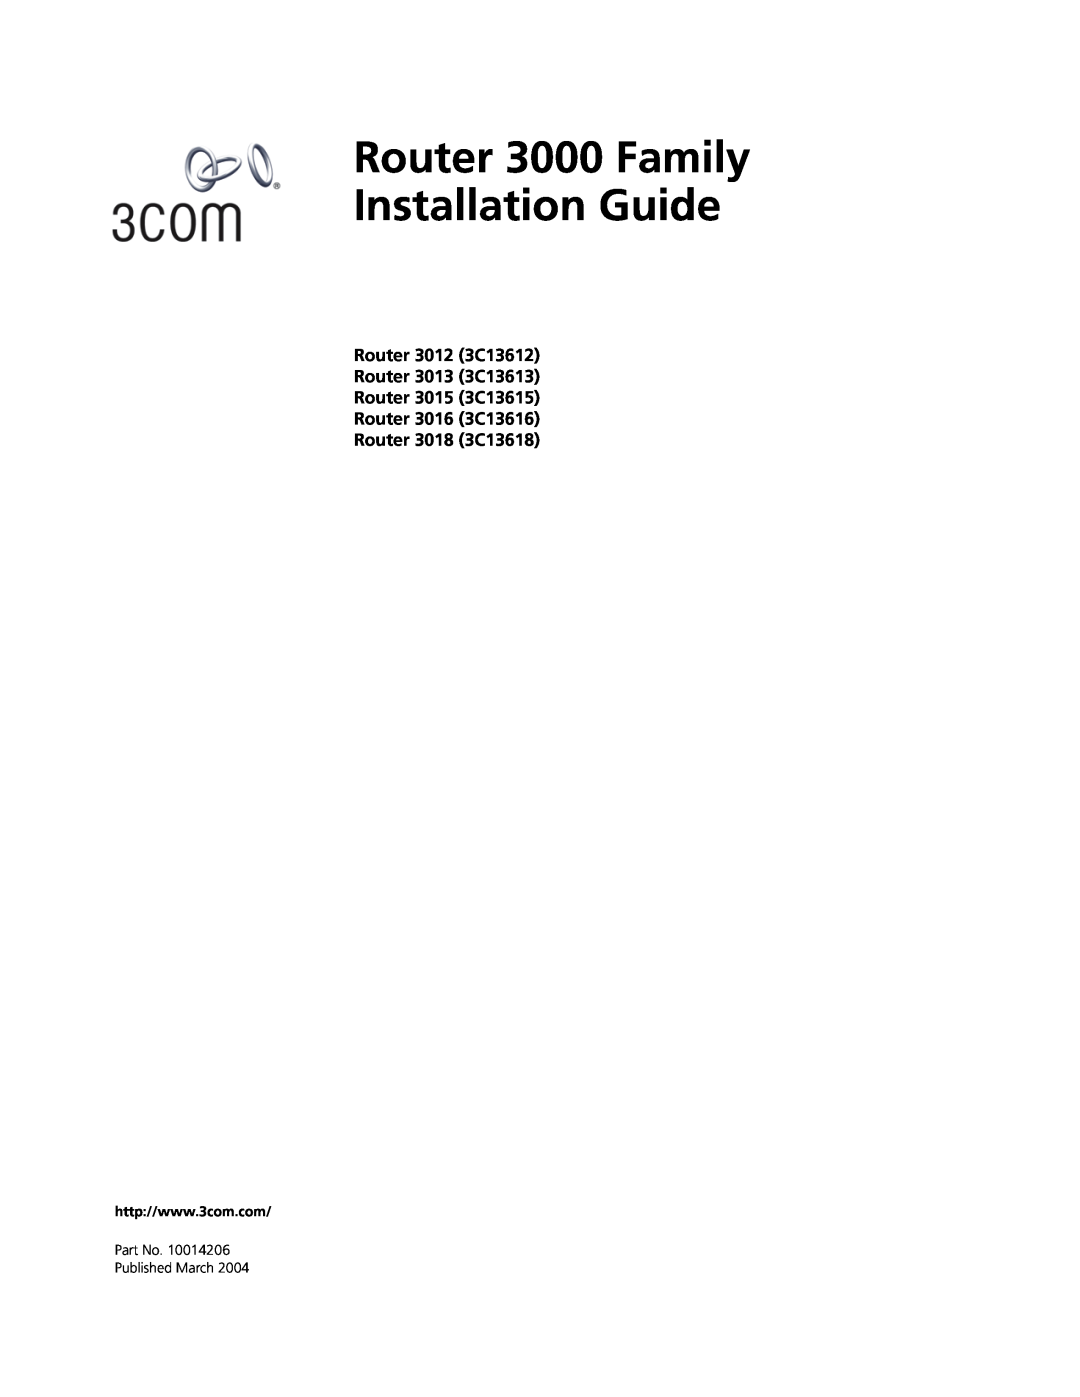 3Com 3013 (3C13613) manual Router 3000 Family Installation Guide, Router 3016 3C13616 Router 3018 3C13618, Published March 